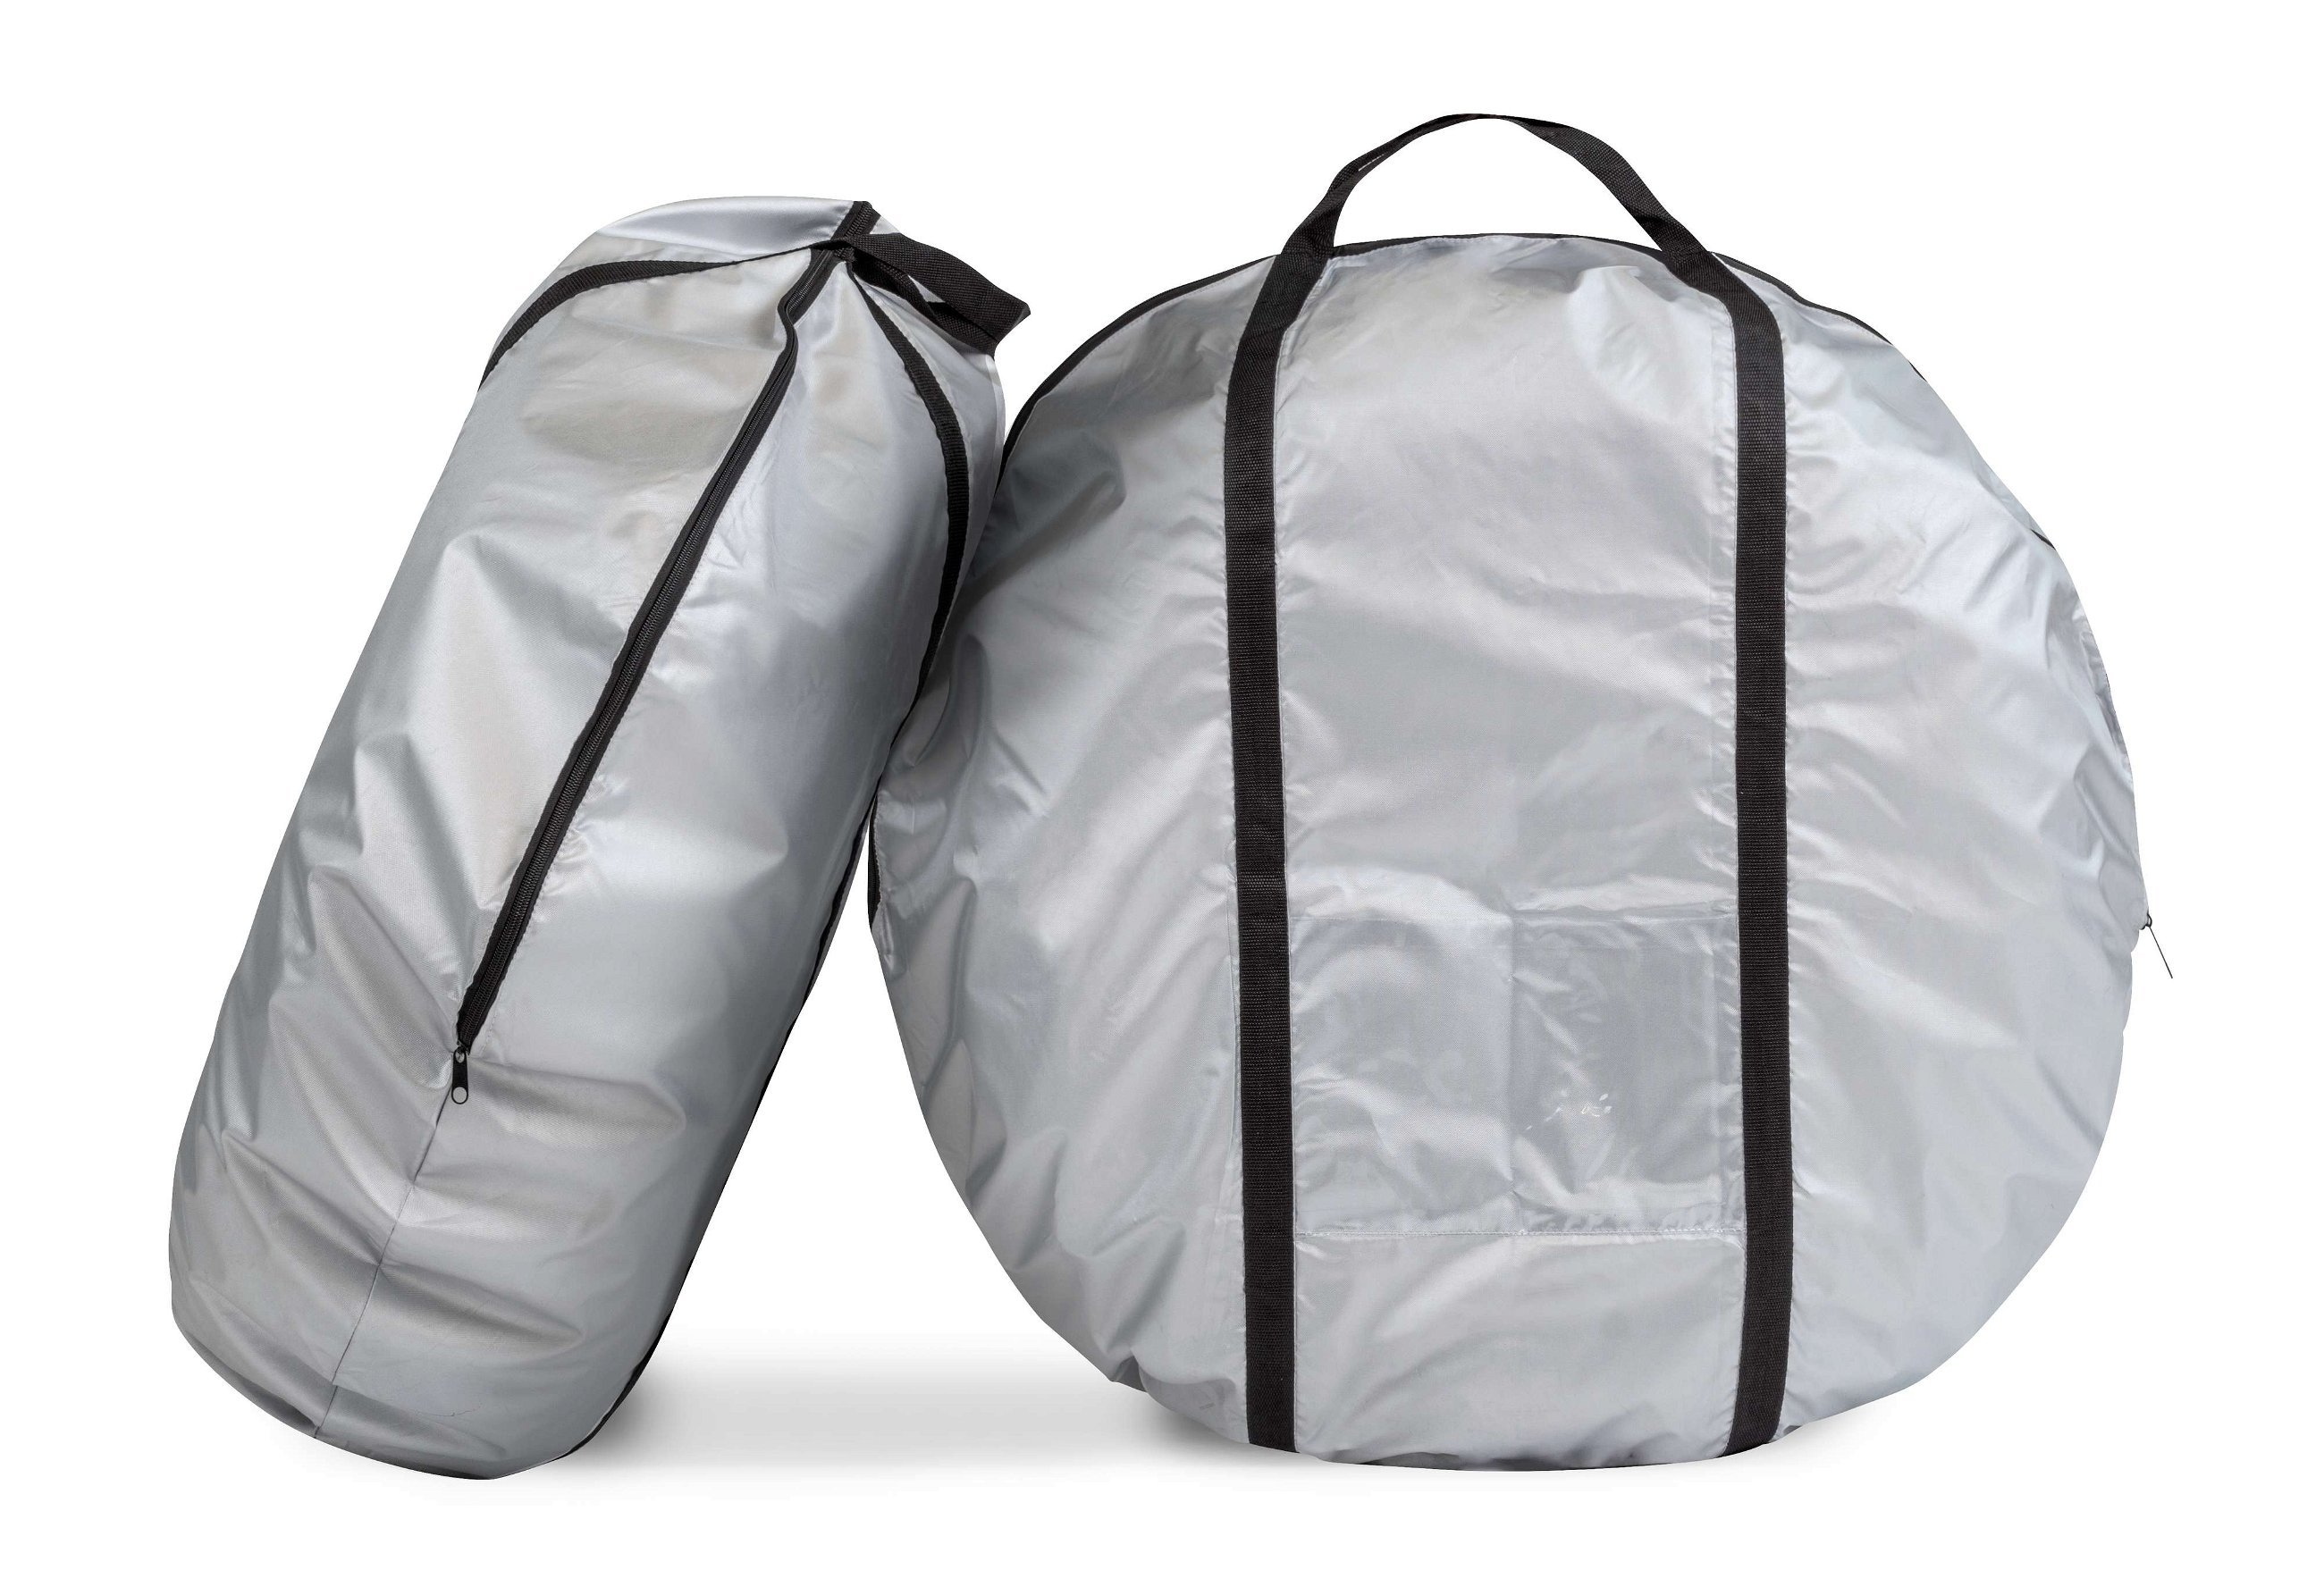 Tire storage Bag size M, tyre bag 15-16 inch tyres silver